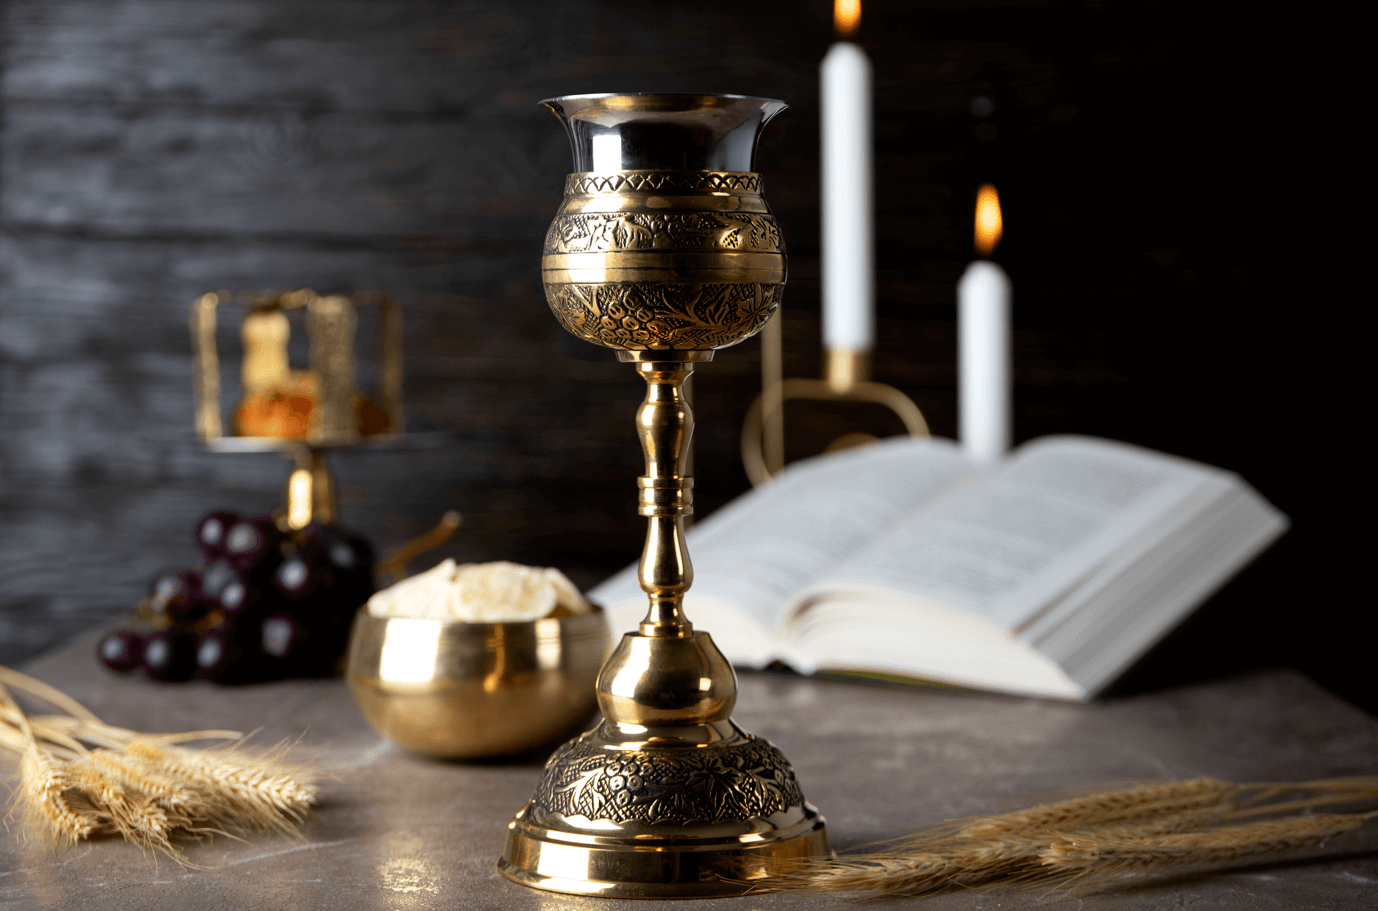 A Eucharist and chalice in a Catholic Church